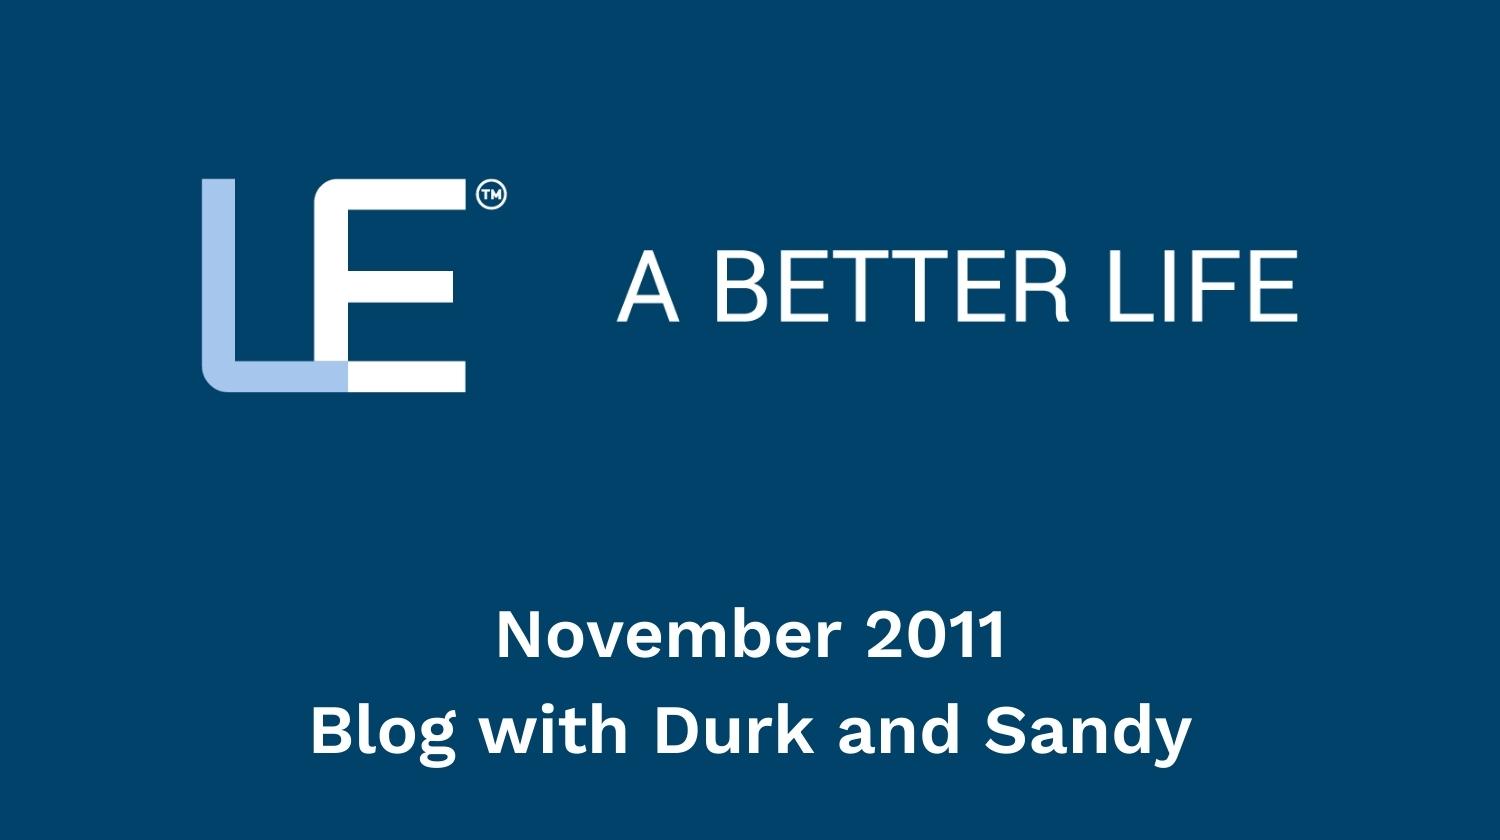 November 2011 Blog with Durk and Sandy